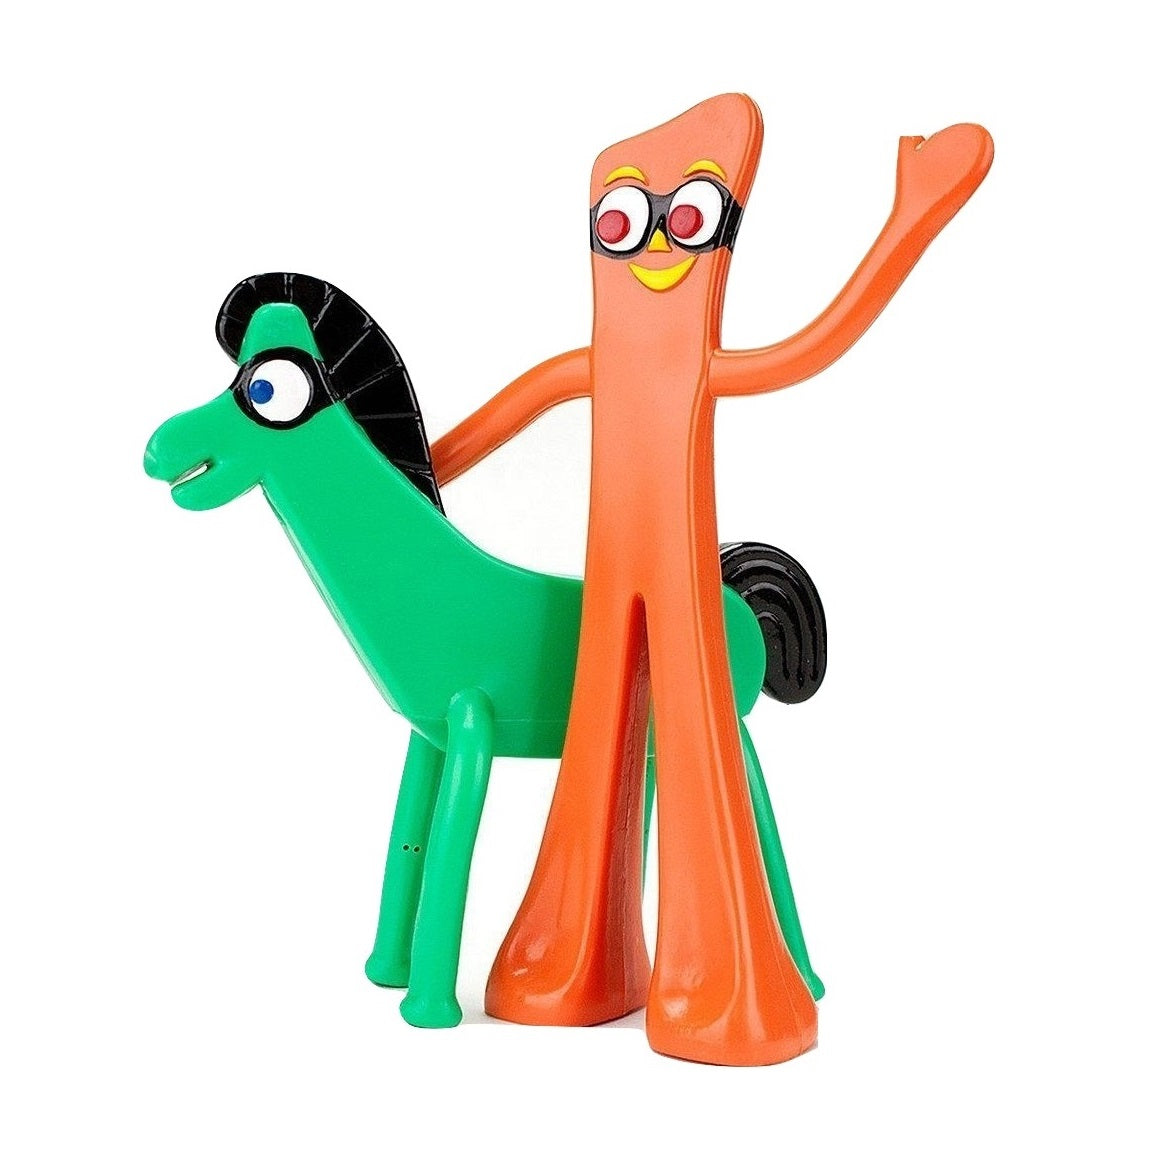 Gumby and Pokey in disguise figure pair